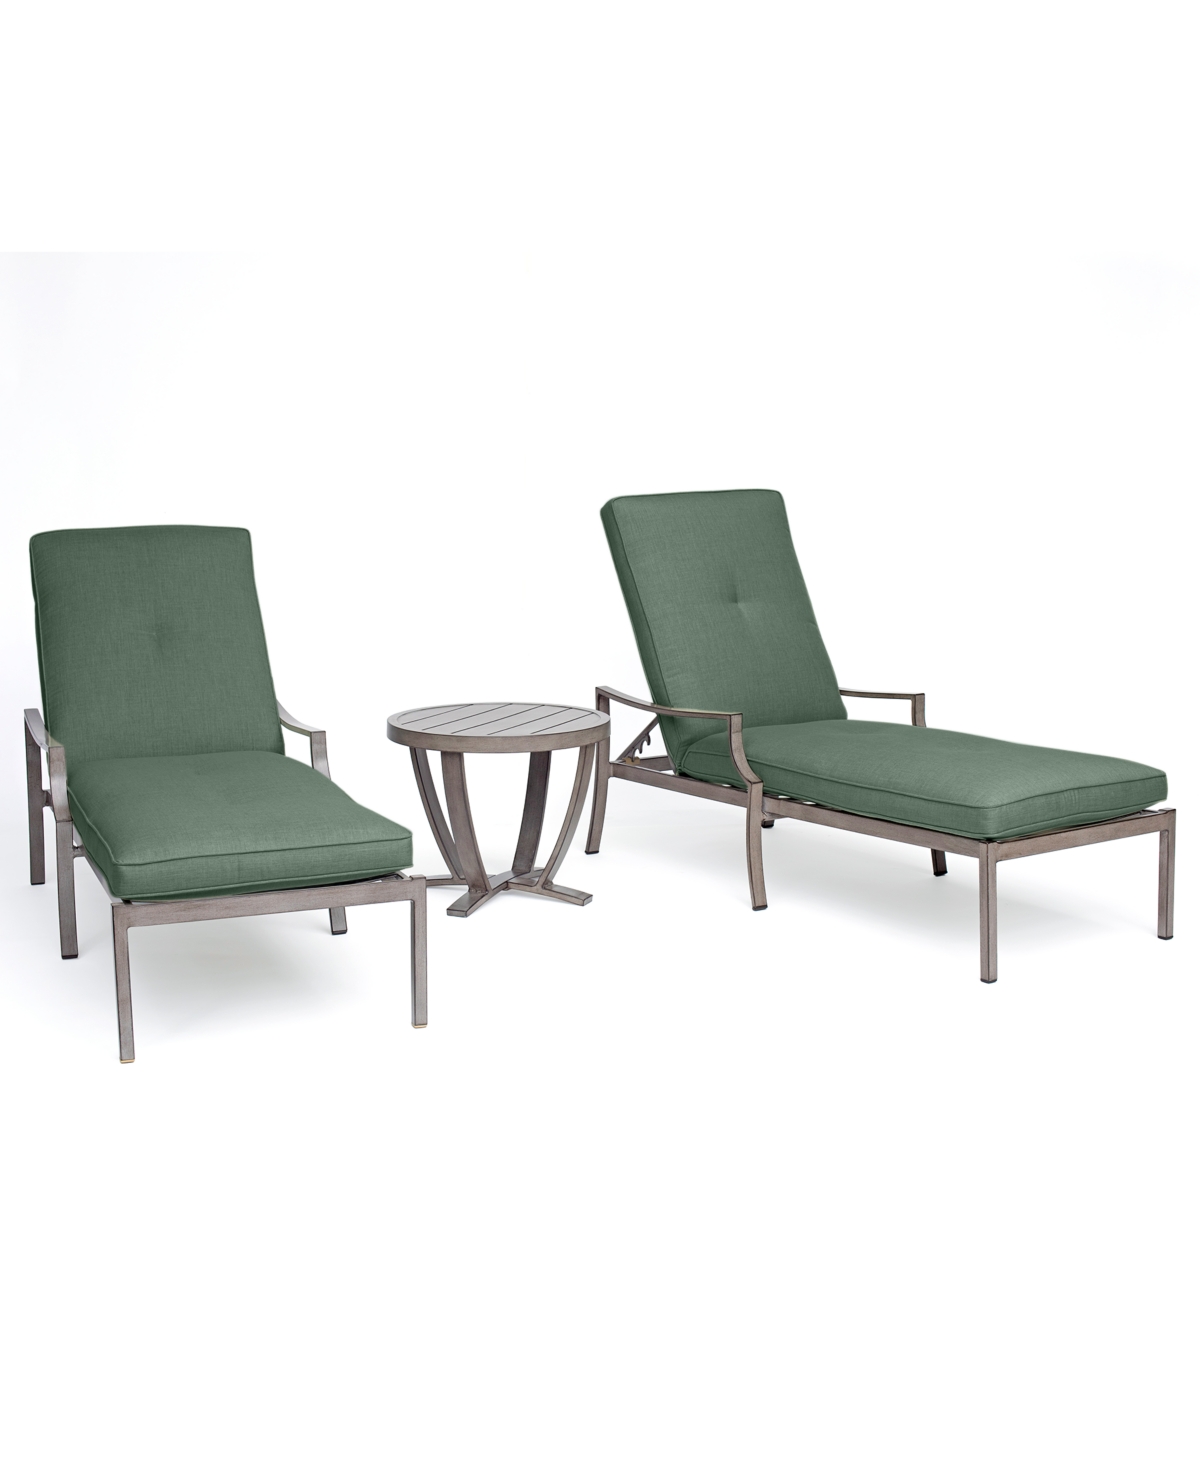 Agio Wayland Outdoor Aluminum 3-pc. Chaise Set (2 Chaise Lounges & 1 End Table), Created For Macy's In Outdura Grasshopper